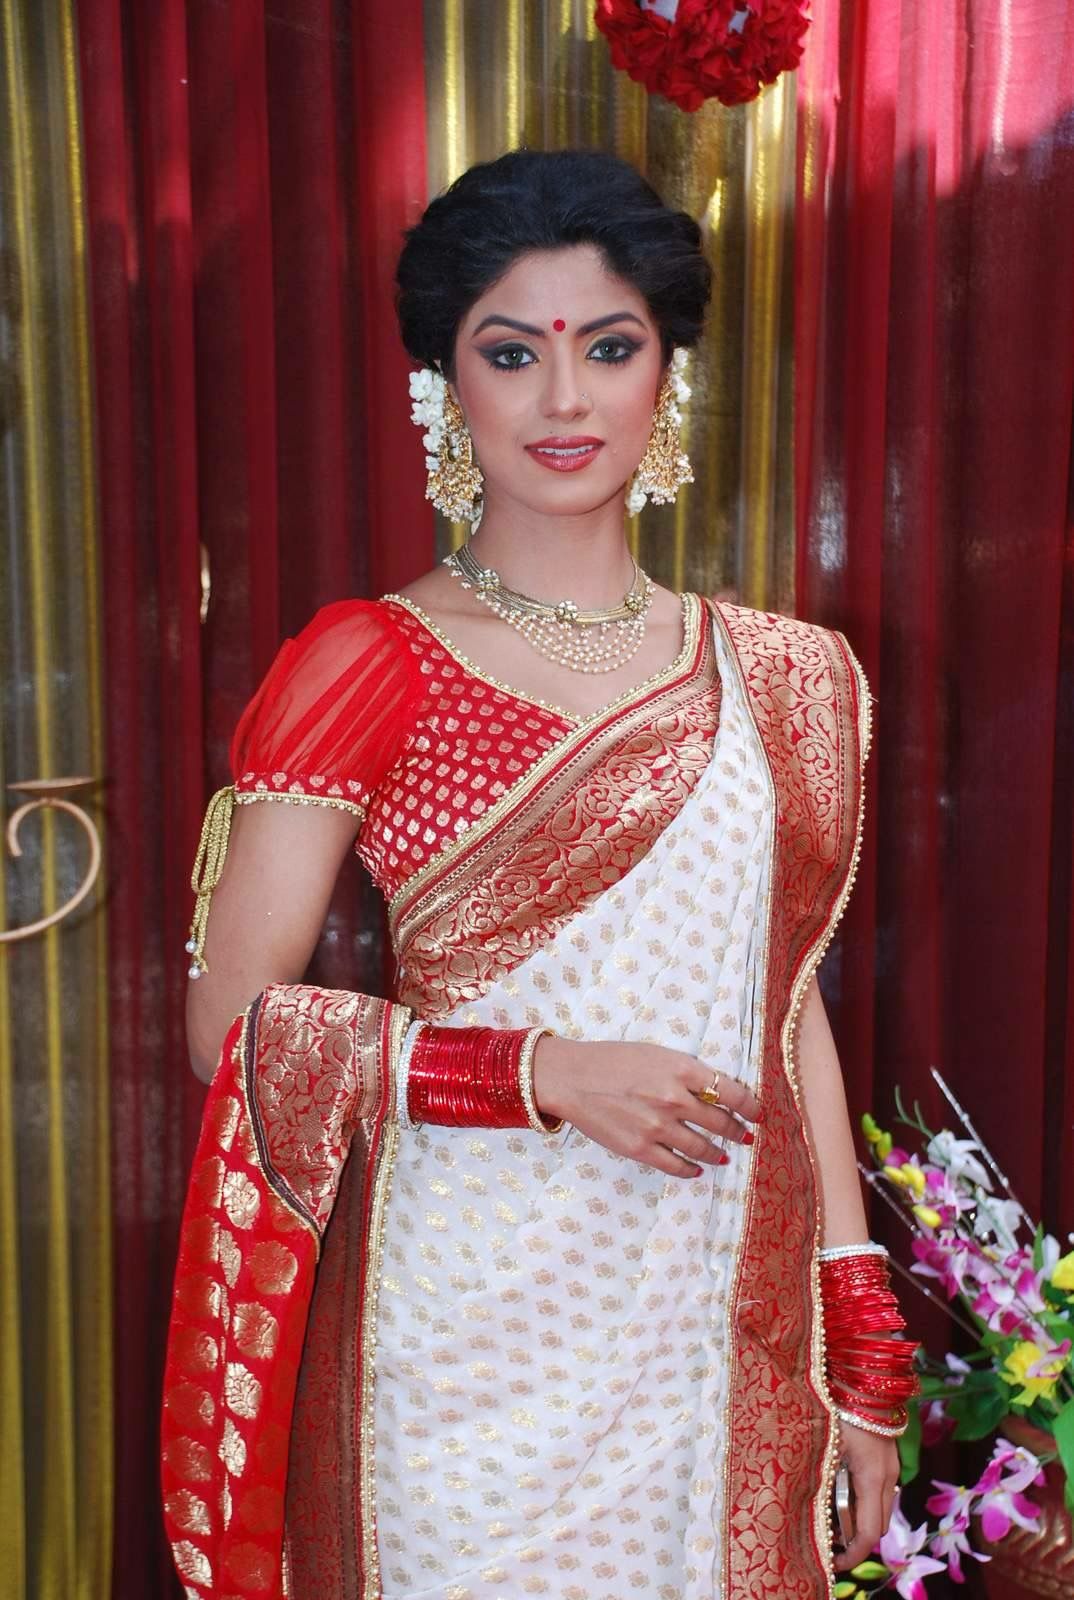 How to Wear Bengali Saree Step by Step Learn from Images Bengali Sarees Buy Online Bengali Silk Saree How to Wear Bengali Saree Bengali Style Saree Draping picture